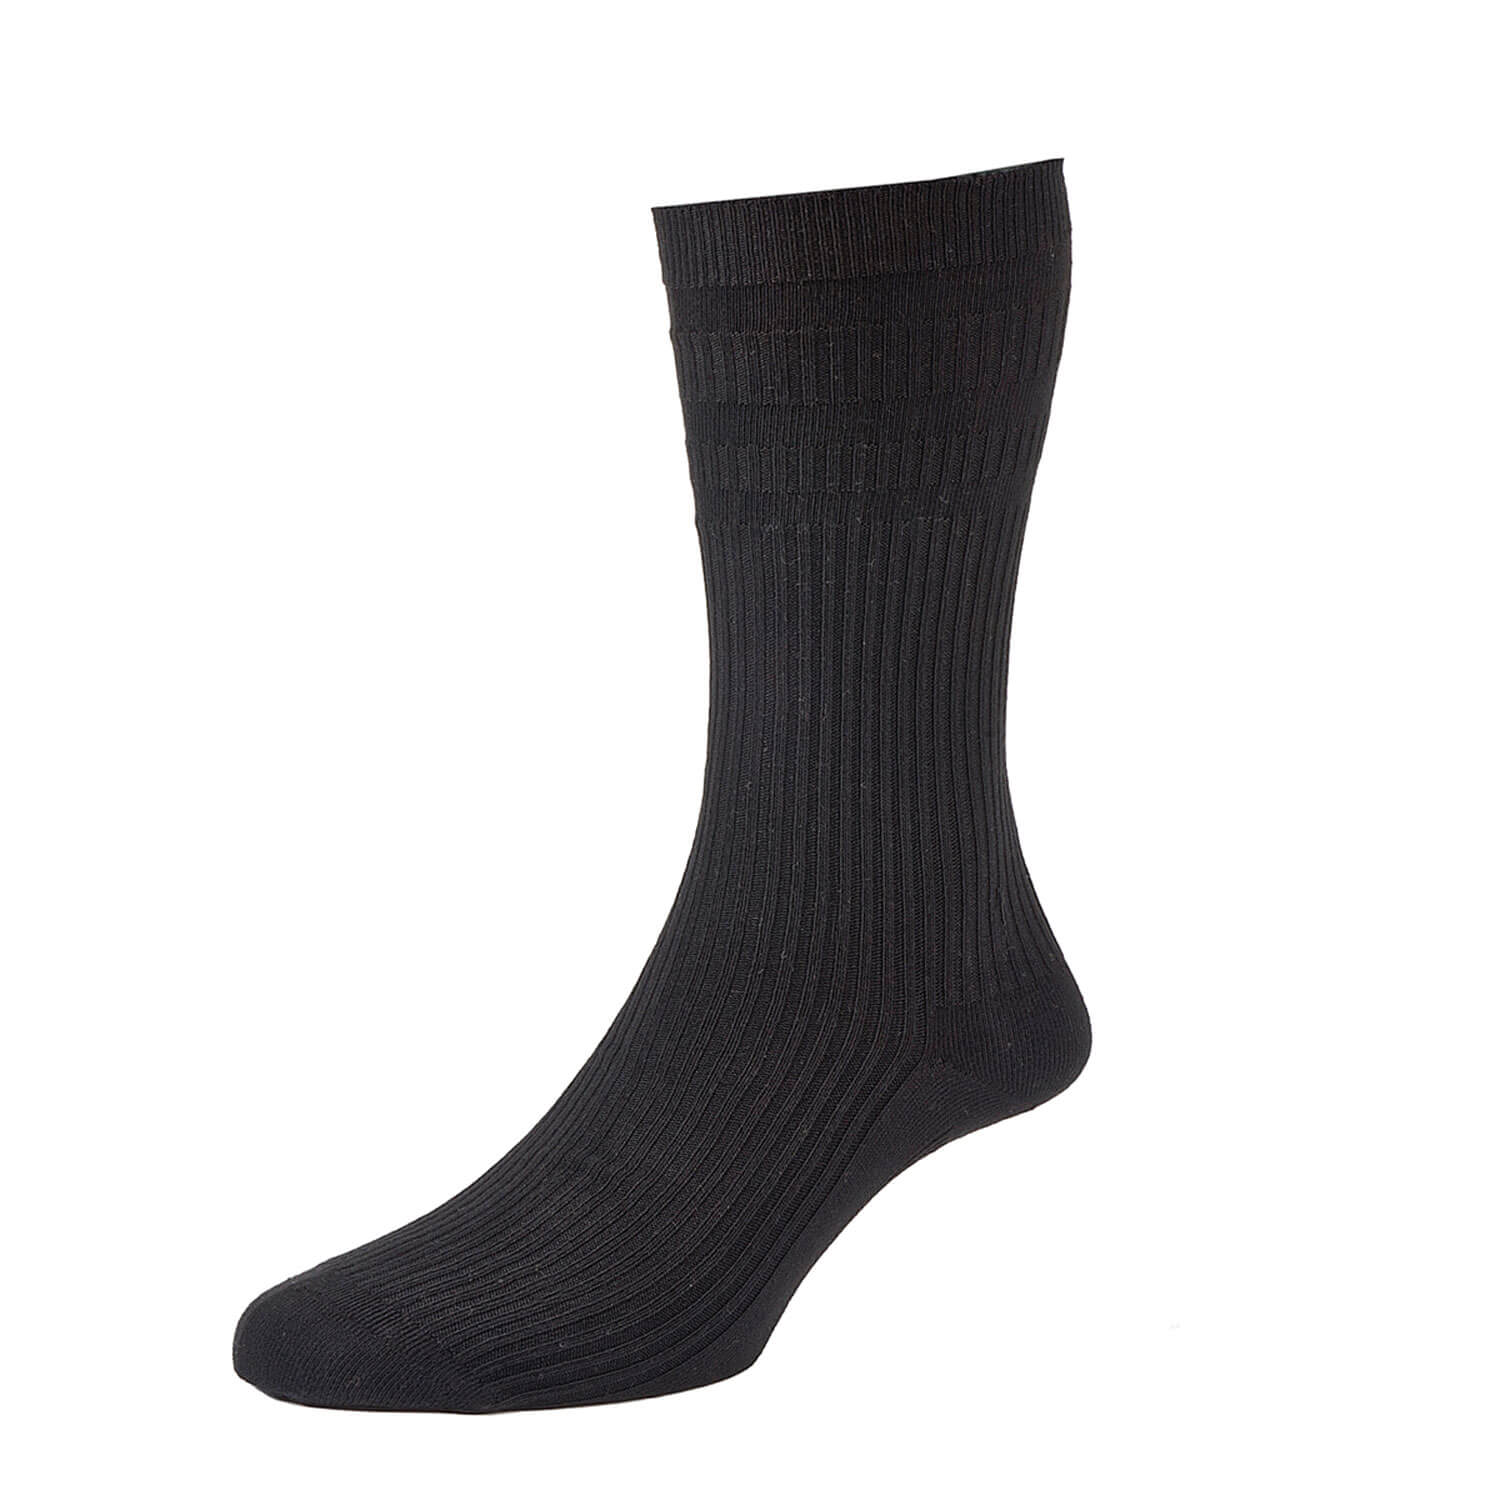 Hj Hall Softop Cotton Rich Socks - Black 1 Shaws Department Stores